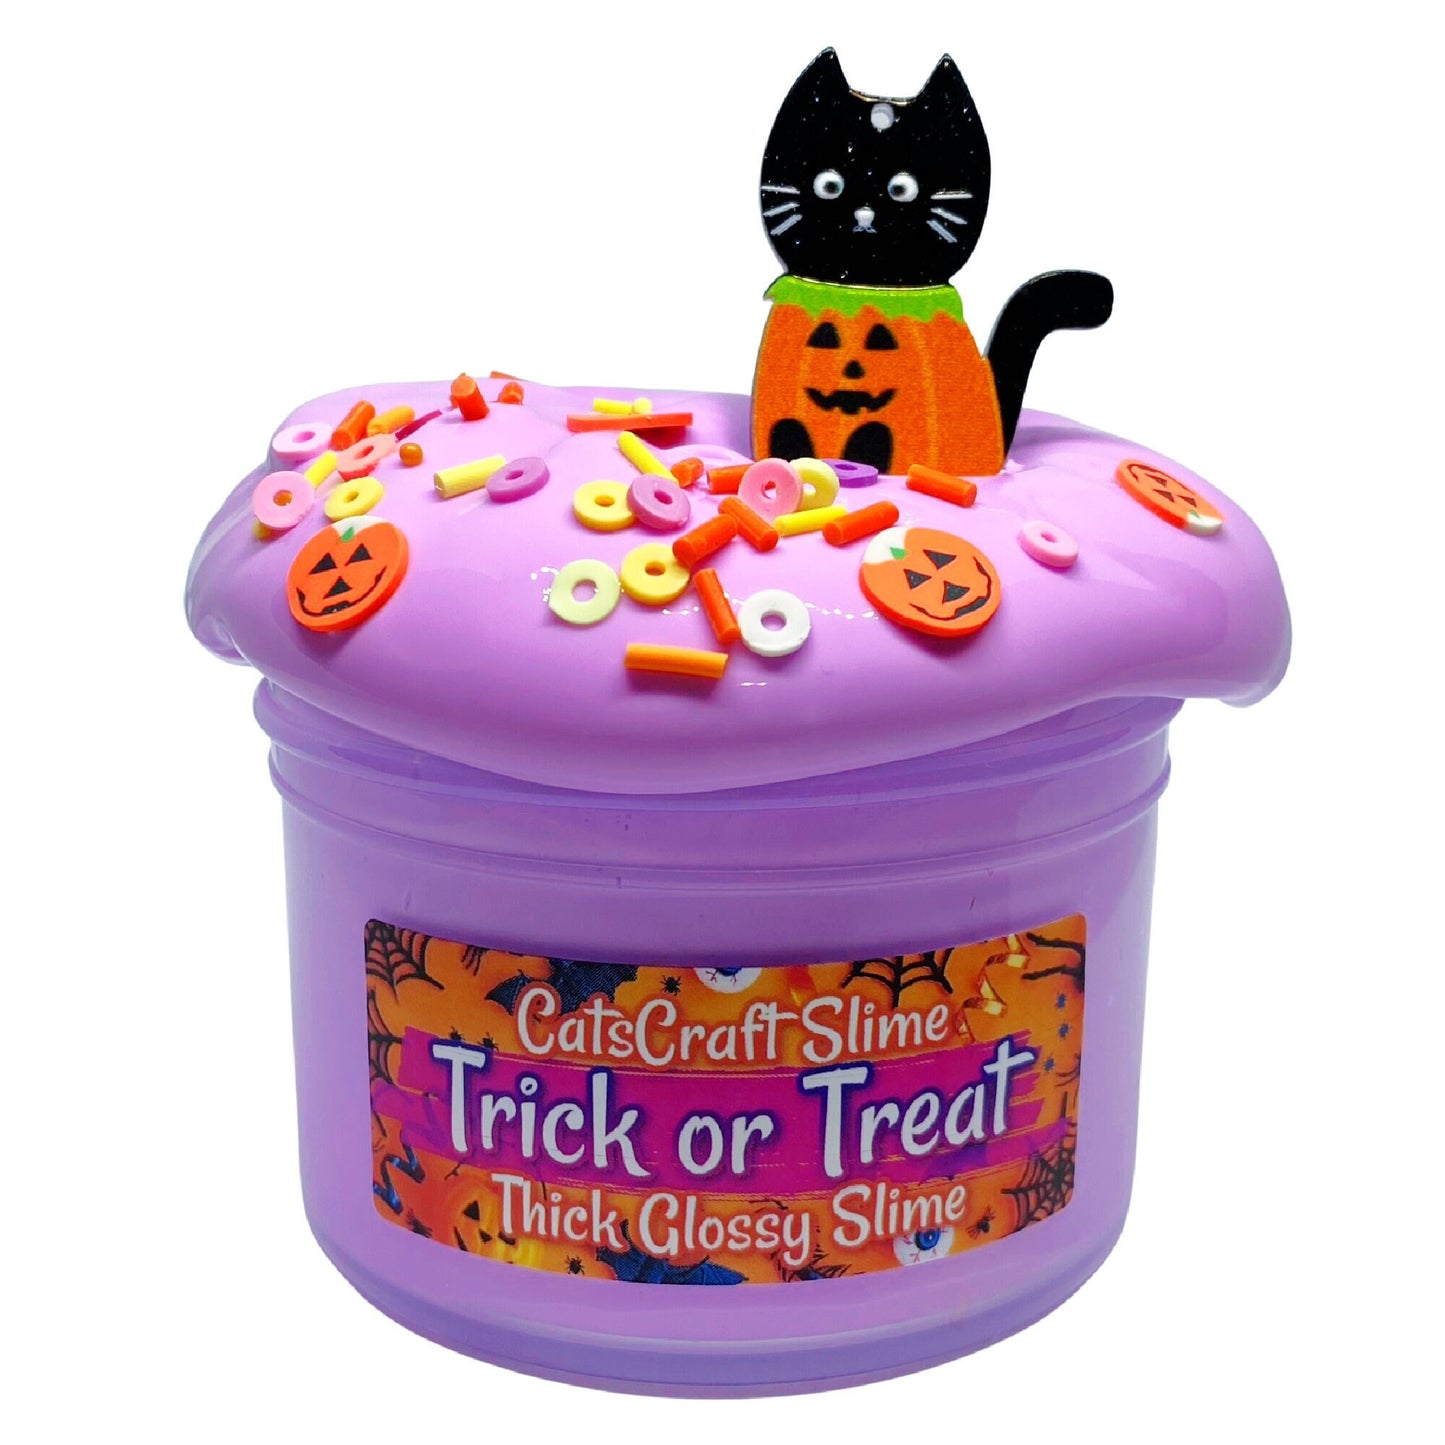 Thick Glossy Slime "Trick or Treat" SCENTED ASMR Cat Charm Halloween Fimos 6oz